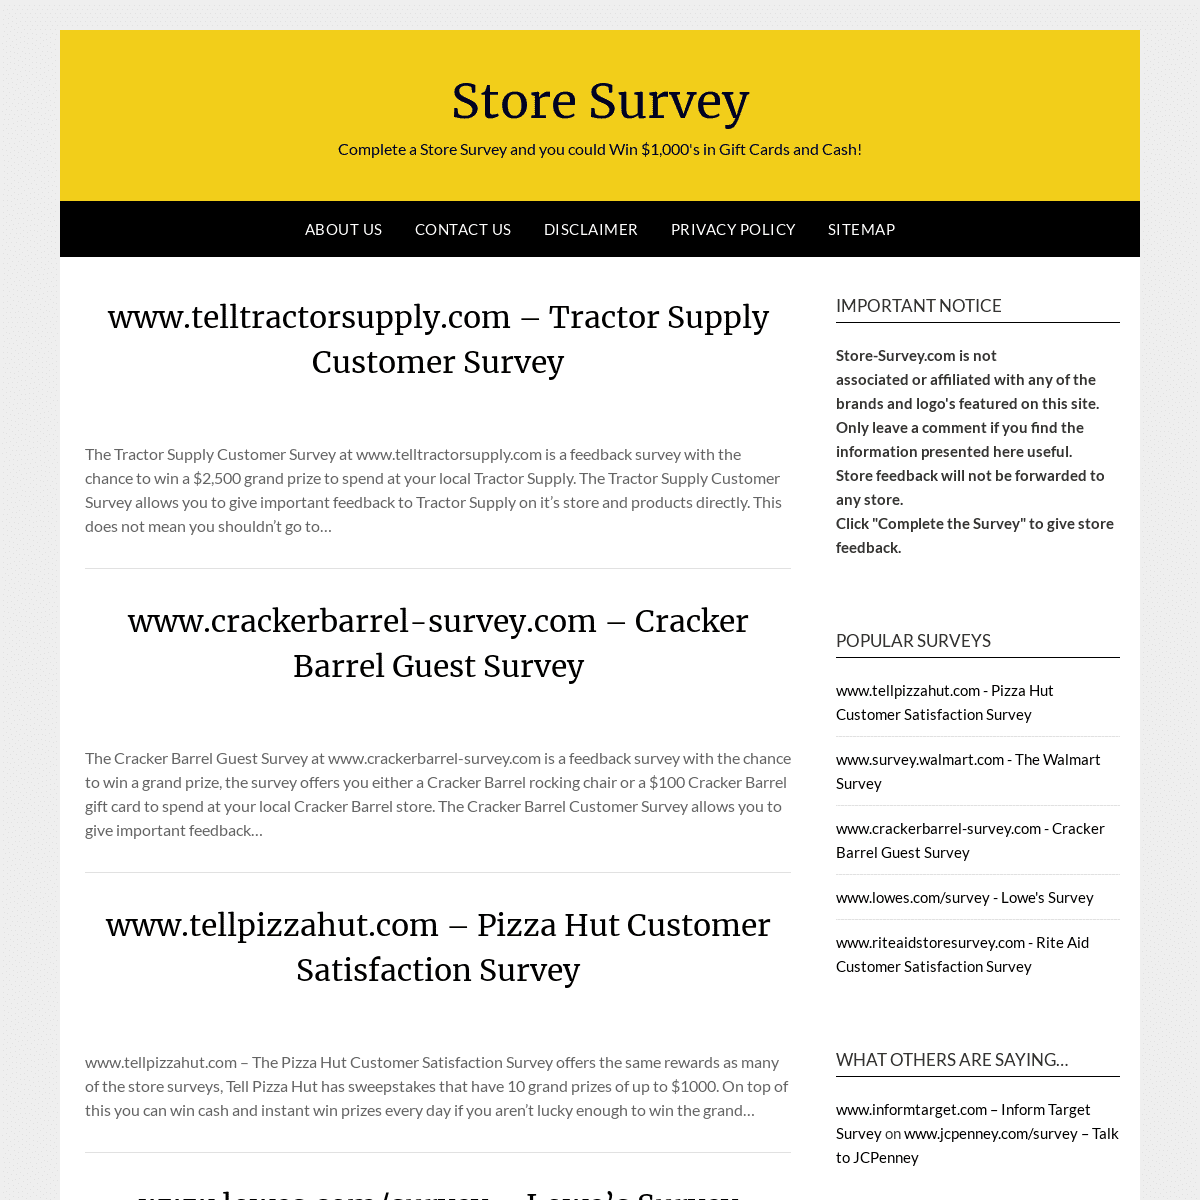 A complete backup of store-survey.com